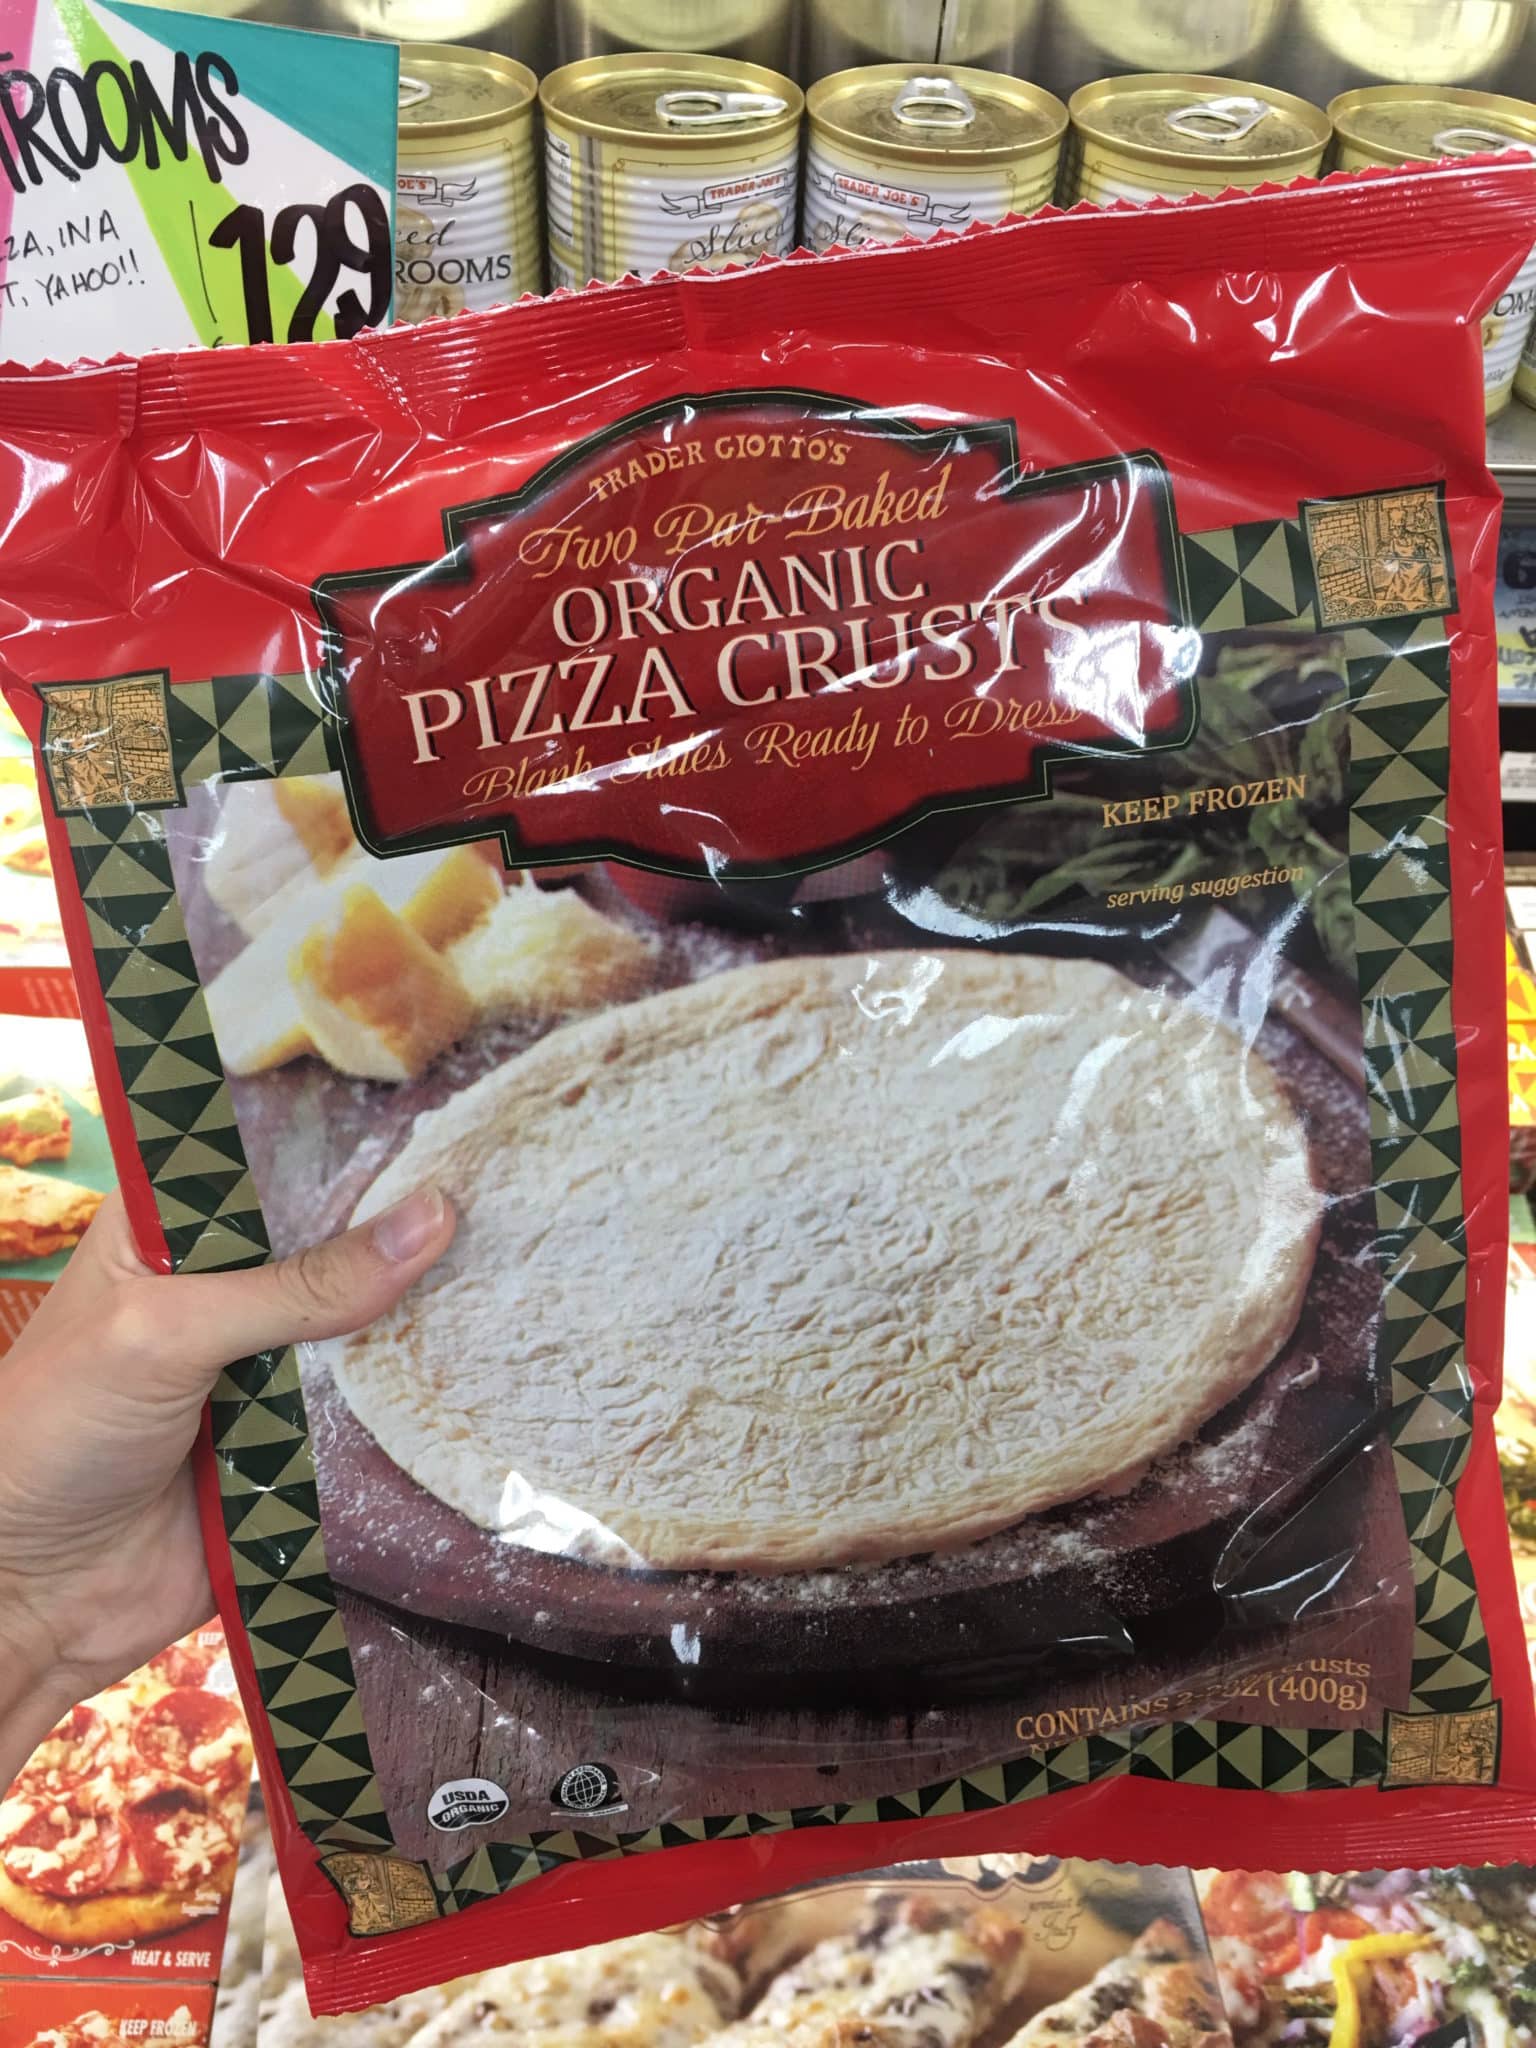 These are our favorite finds from Trader Joe's based on price, taste and healthiness!